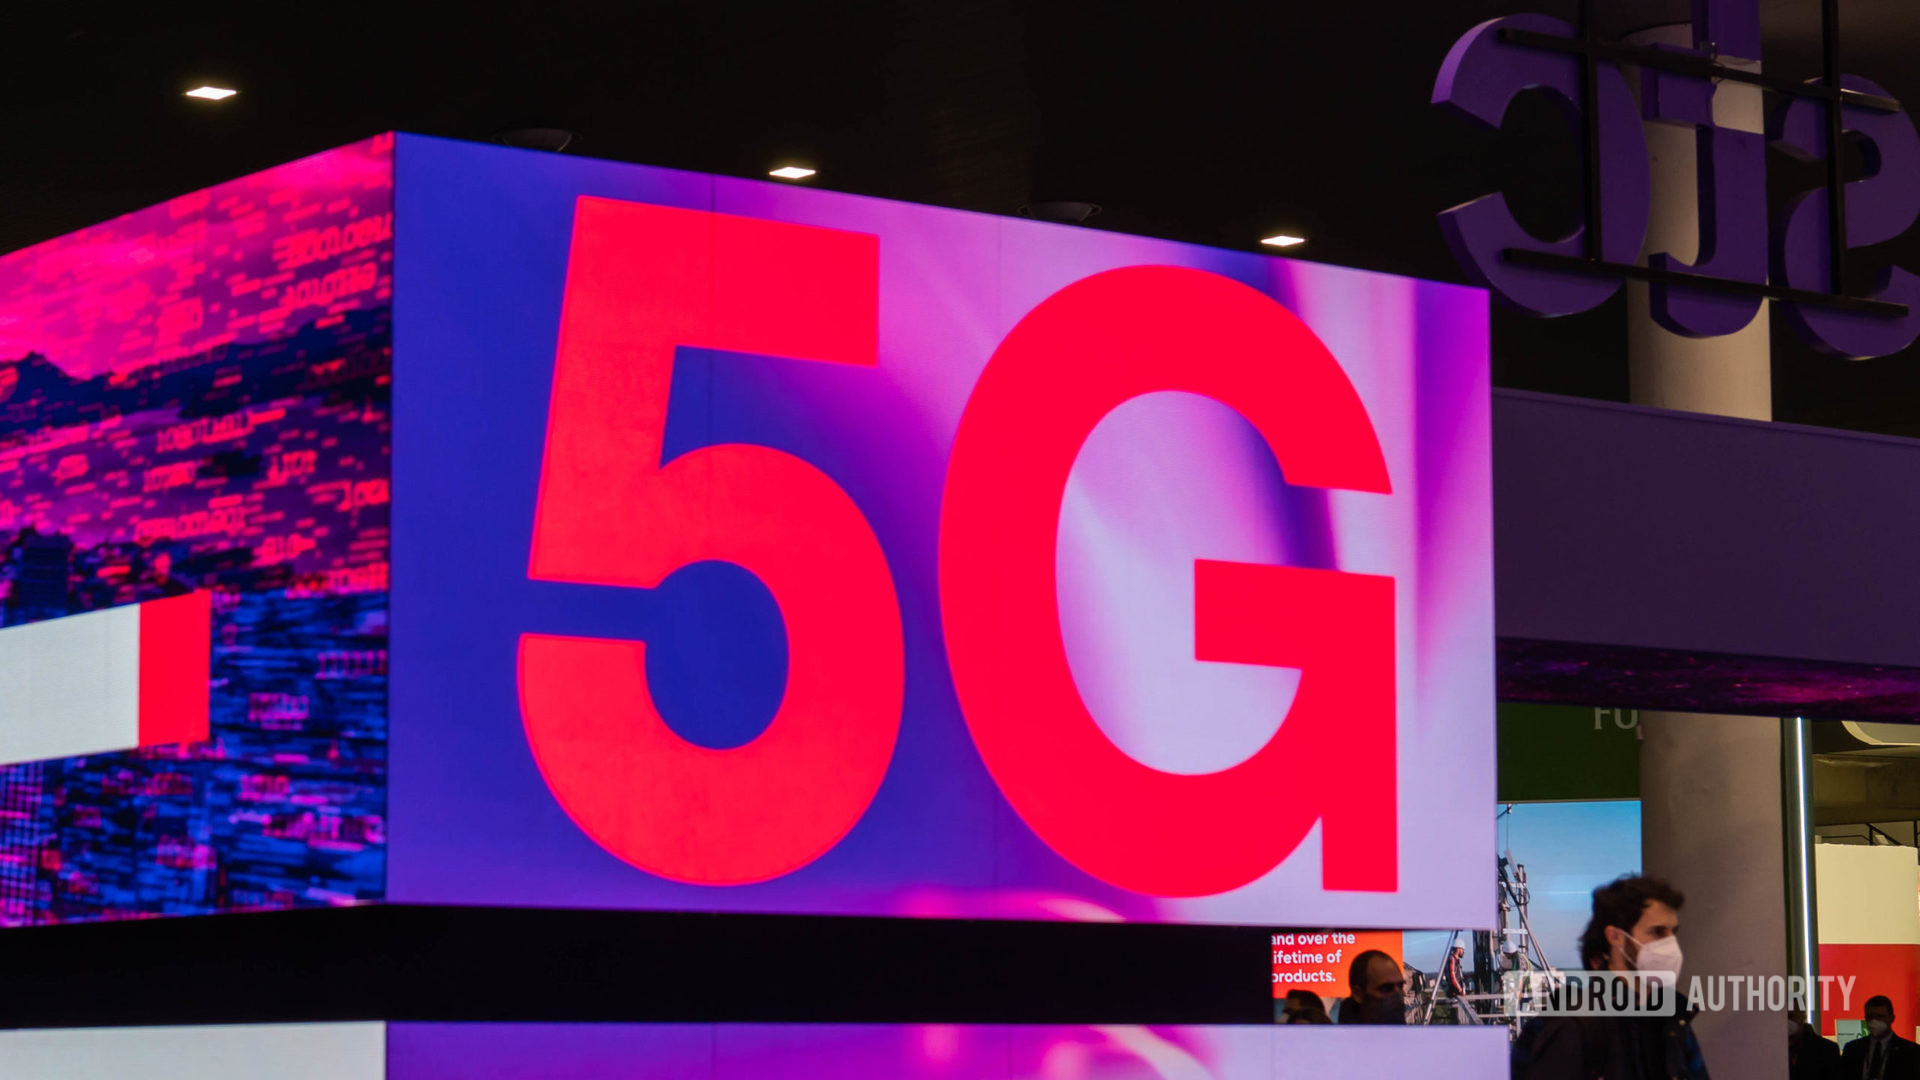 Red 5G logo projected 1